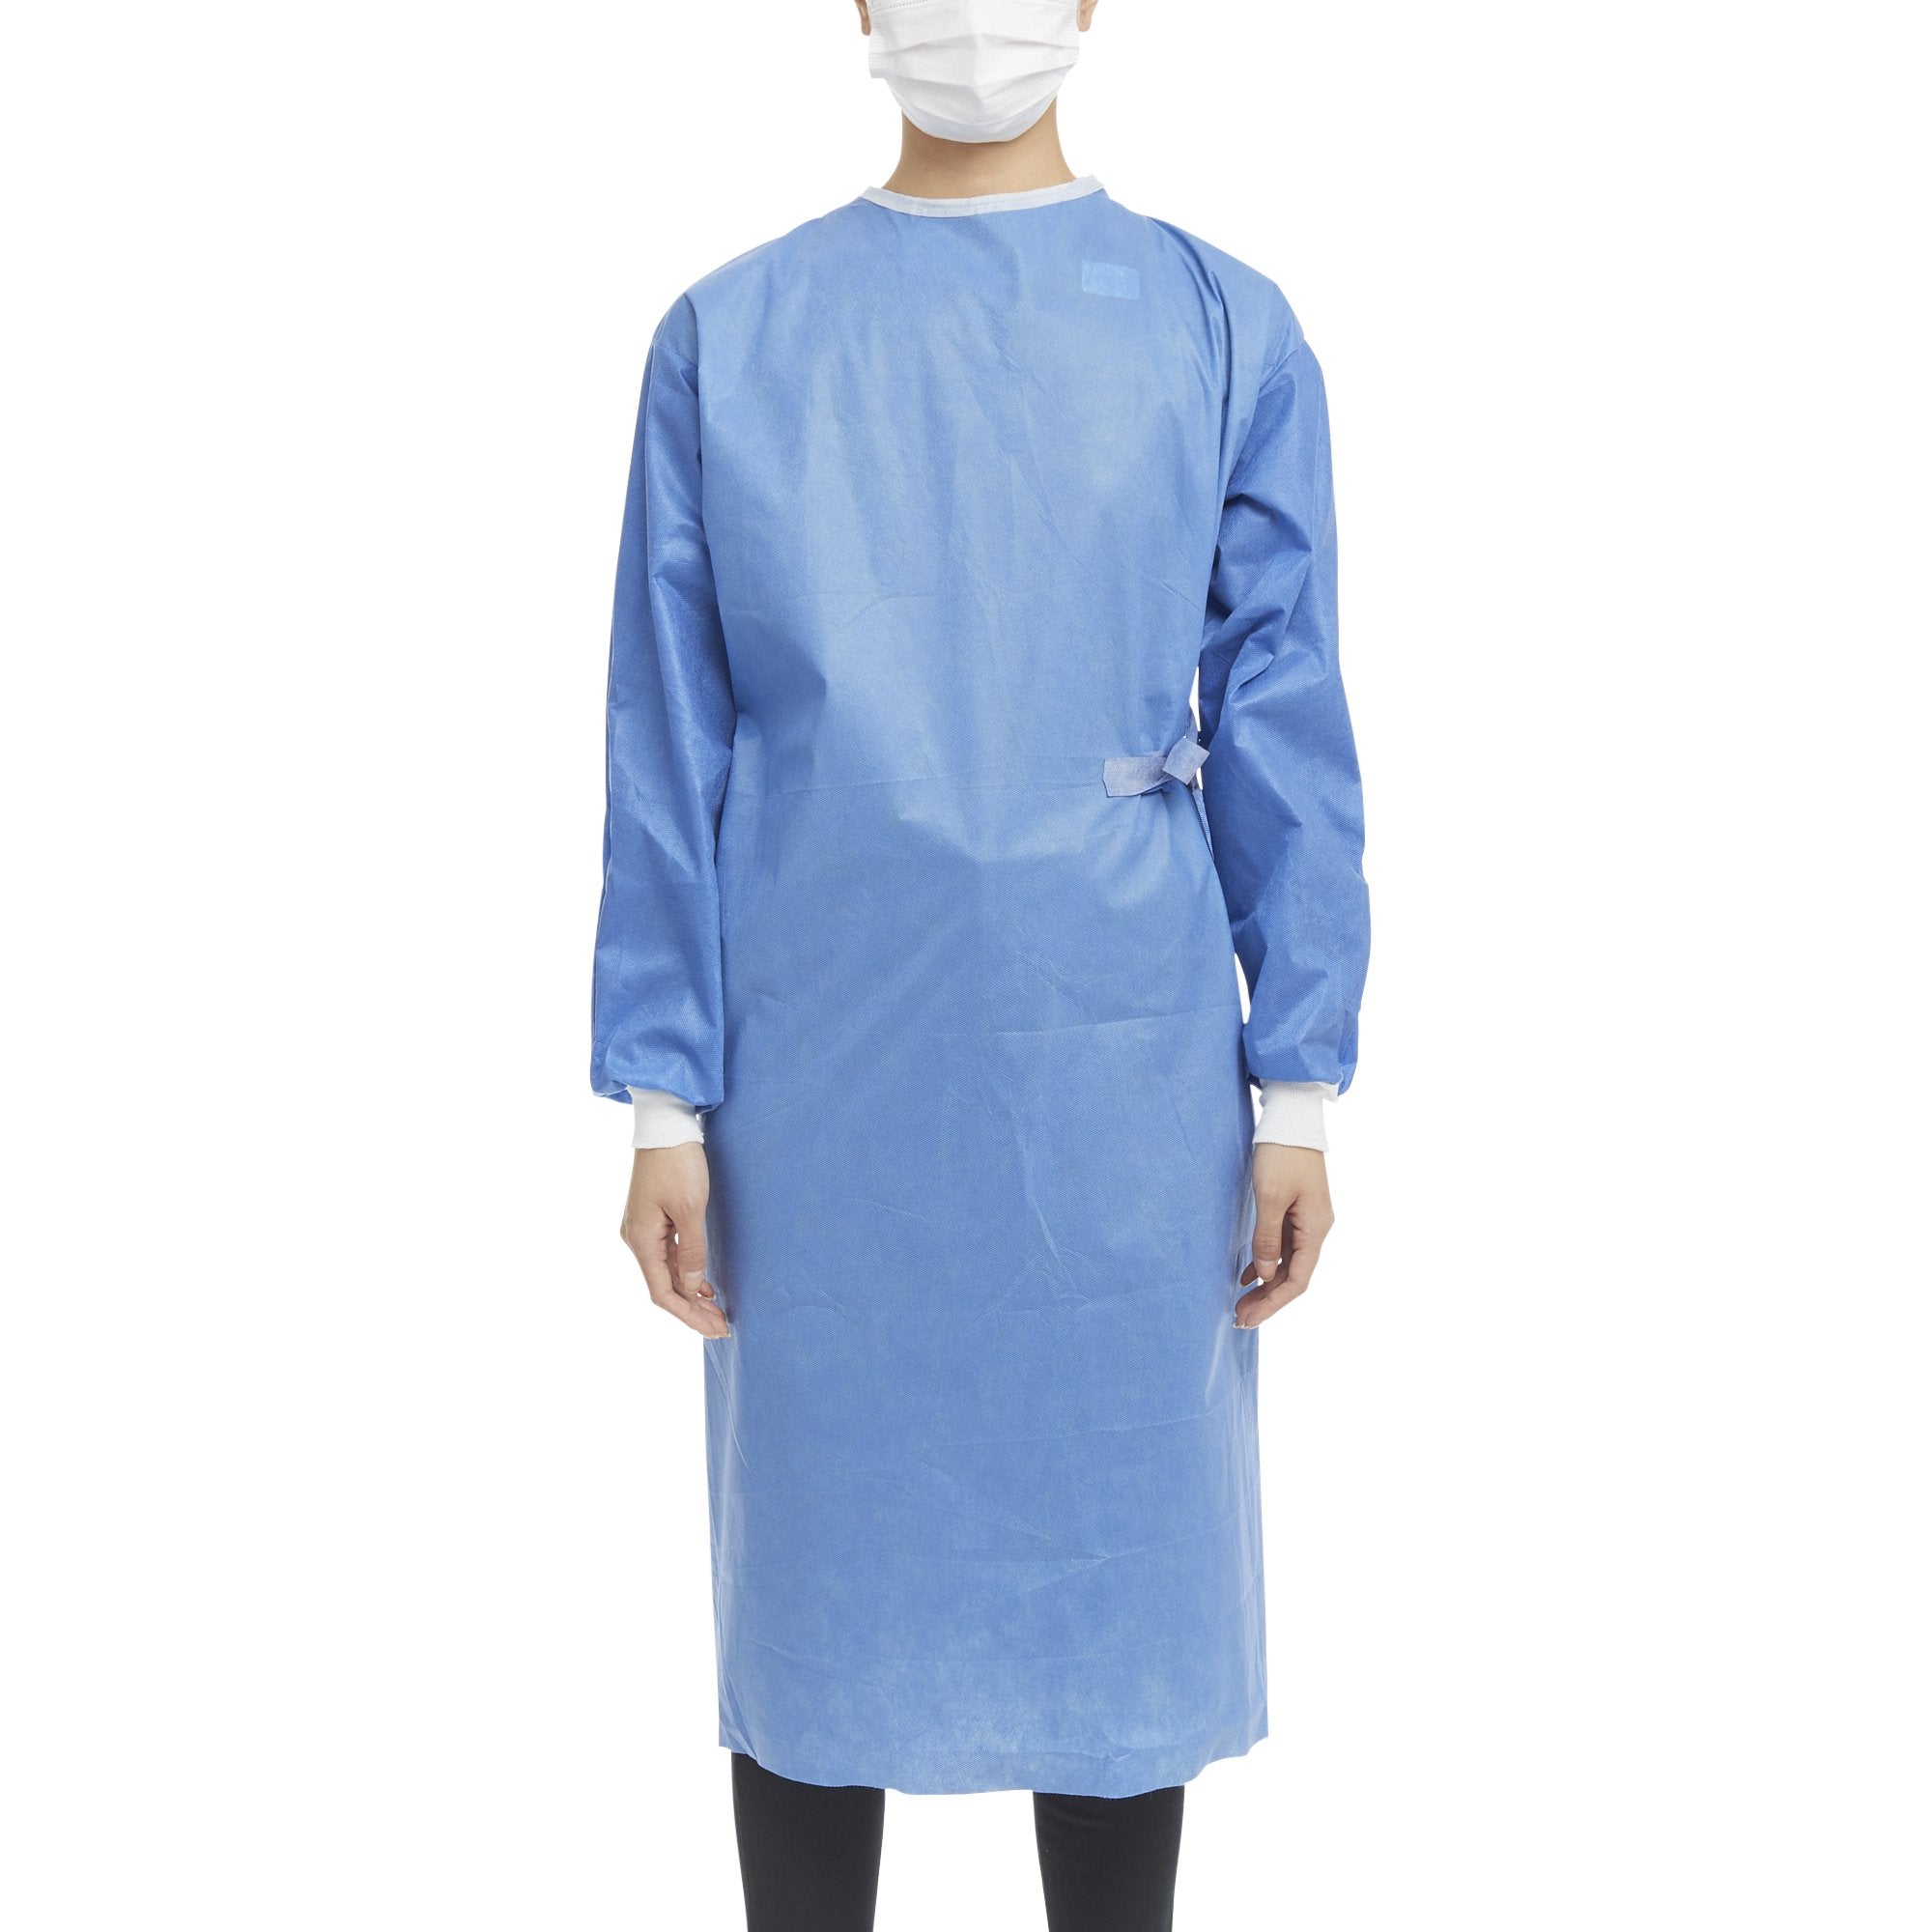 Astound Non-Reinforced Surgical Gown with Towel -Case of 20